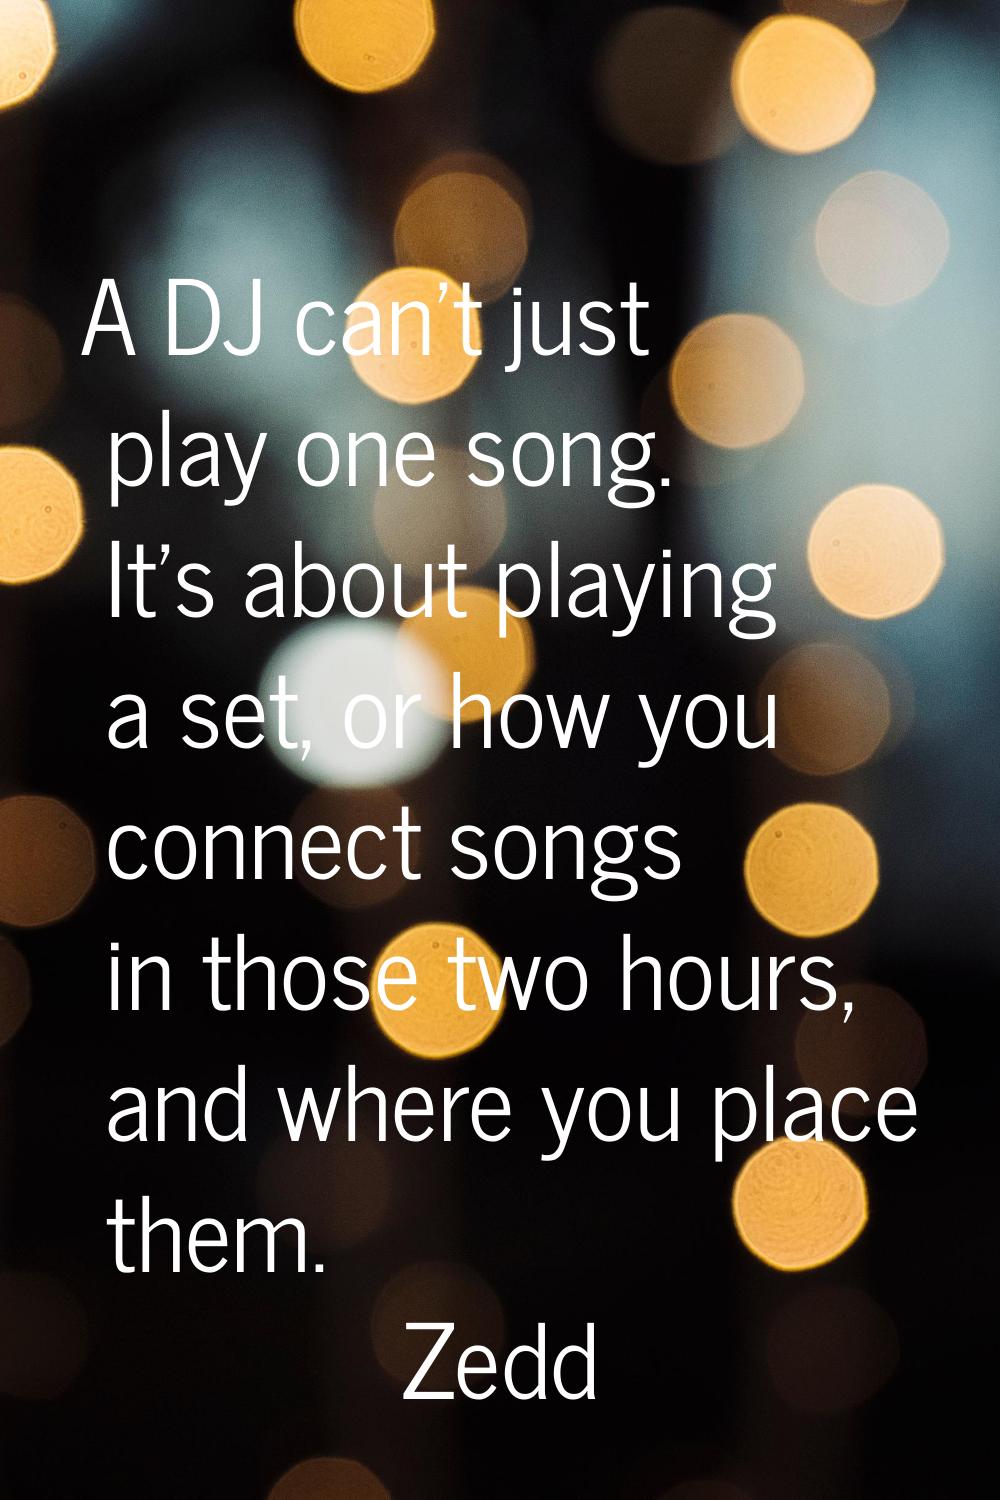 A DJ can't just play one song. It's about playing a set, or how you connect songs in those two hour